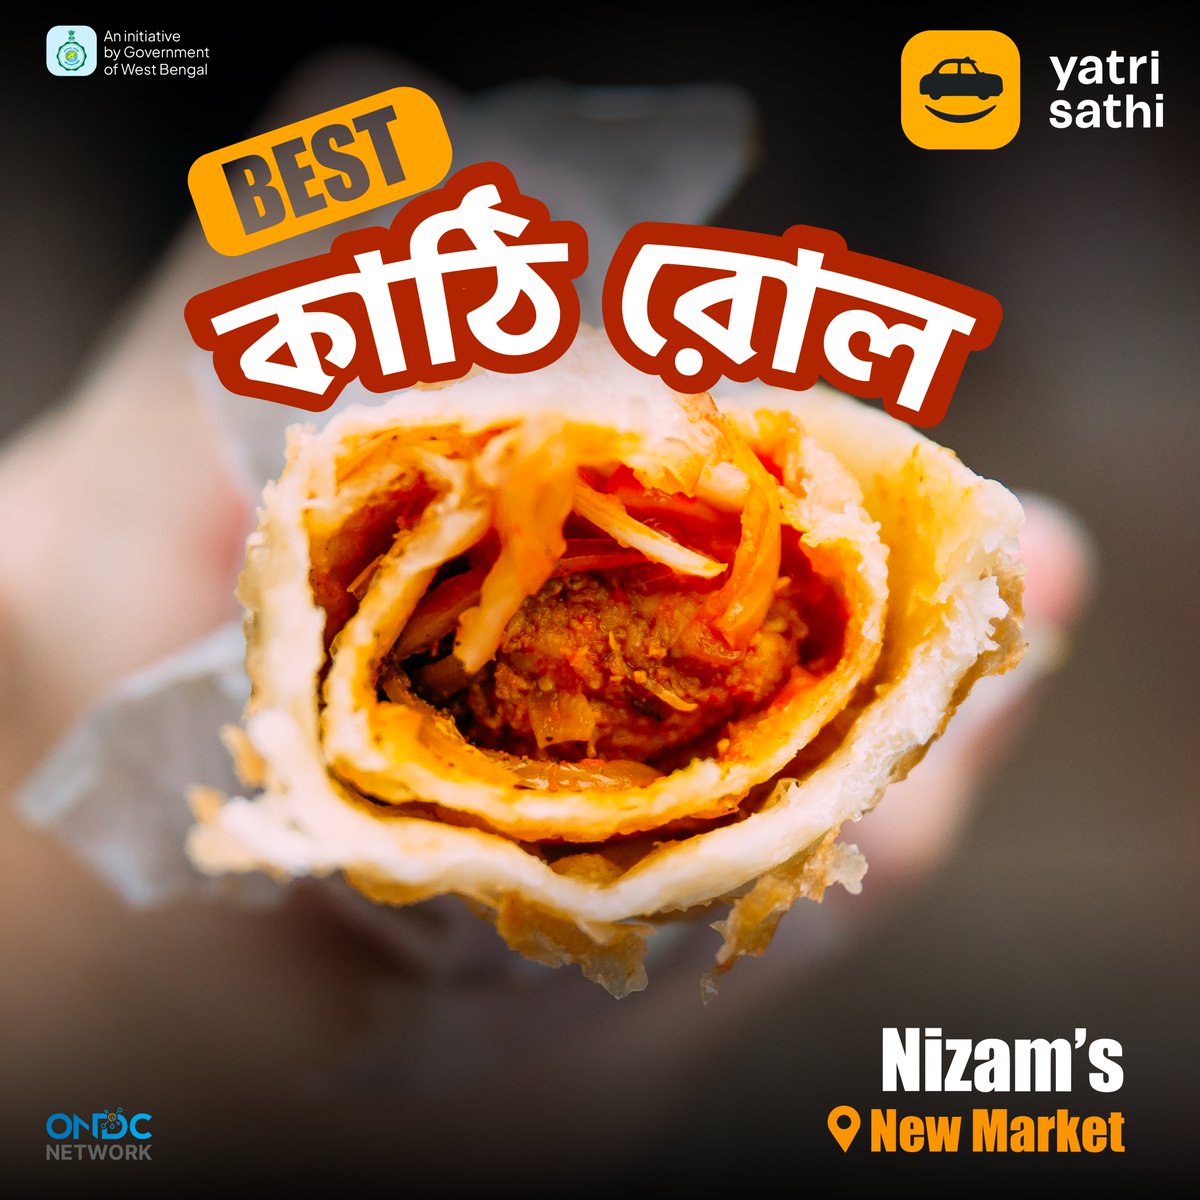 Let’s roll? 🚕
Book a Yatri Sathi from your home to New Market and back! 📍
0% commission. 100% open.

#Food #KolkataFood #YatriSathi #AmarShohorAmarSofor #FoodTrails #KolkataDiaries #StreetFood